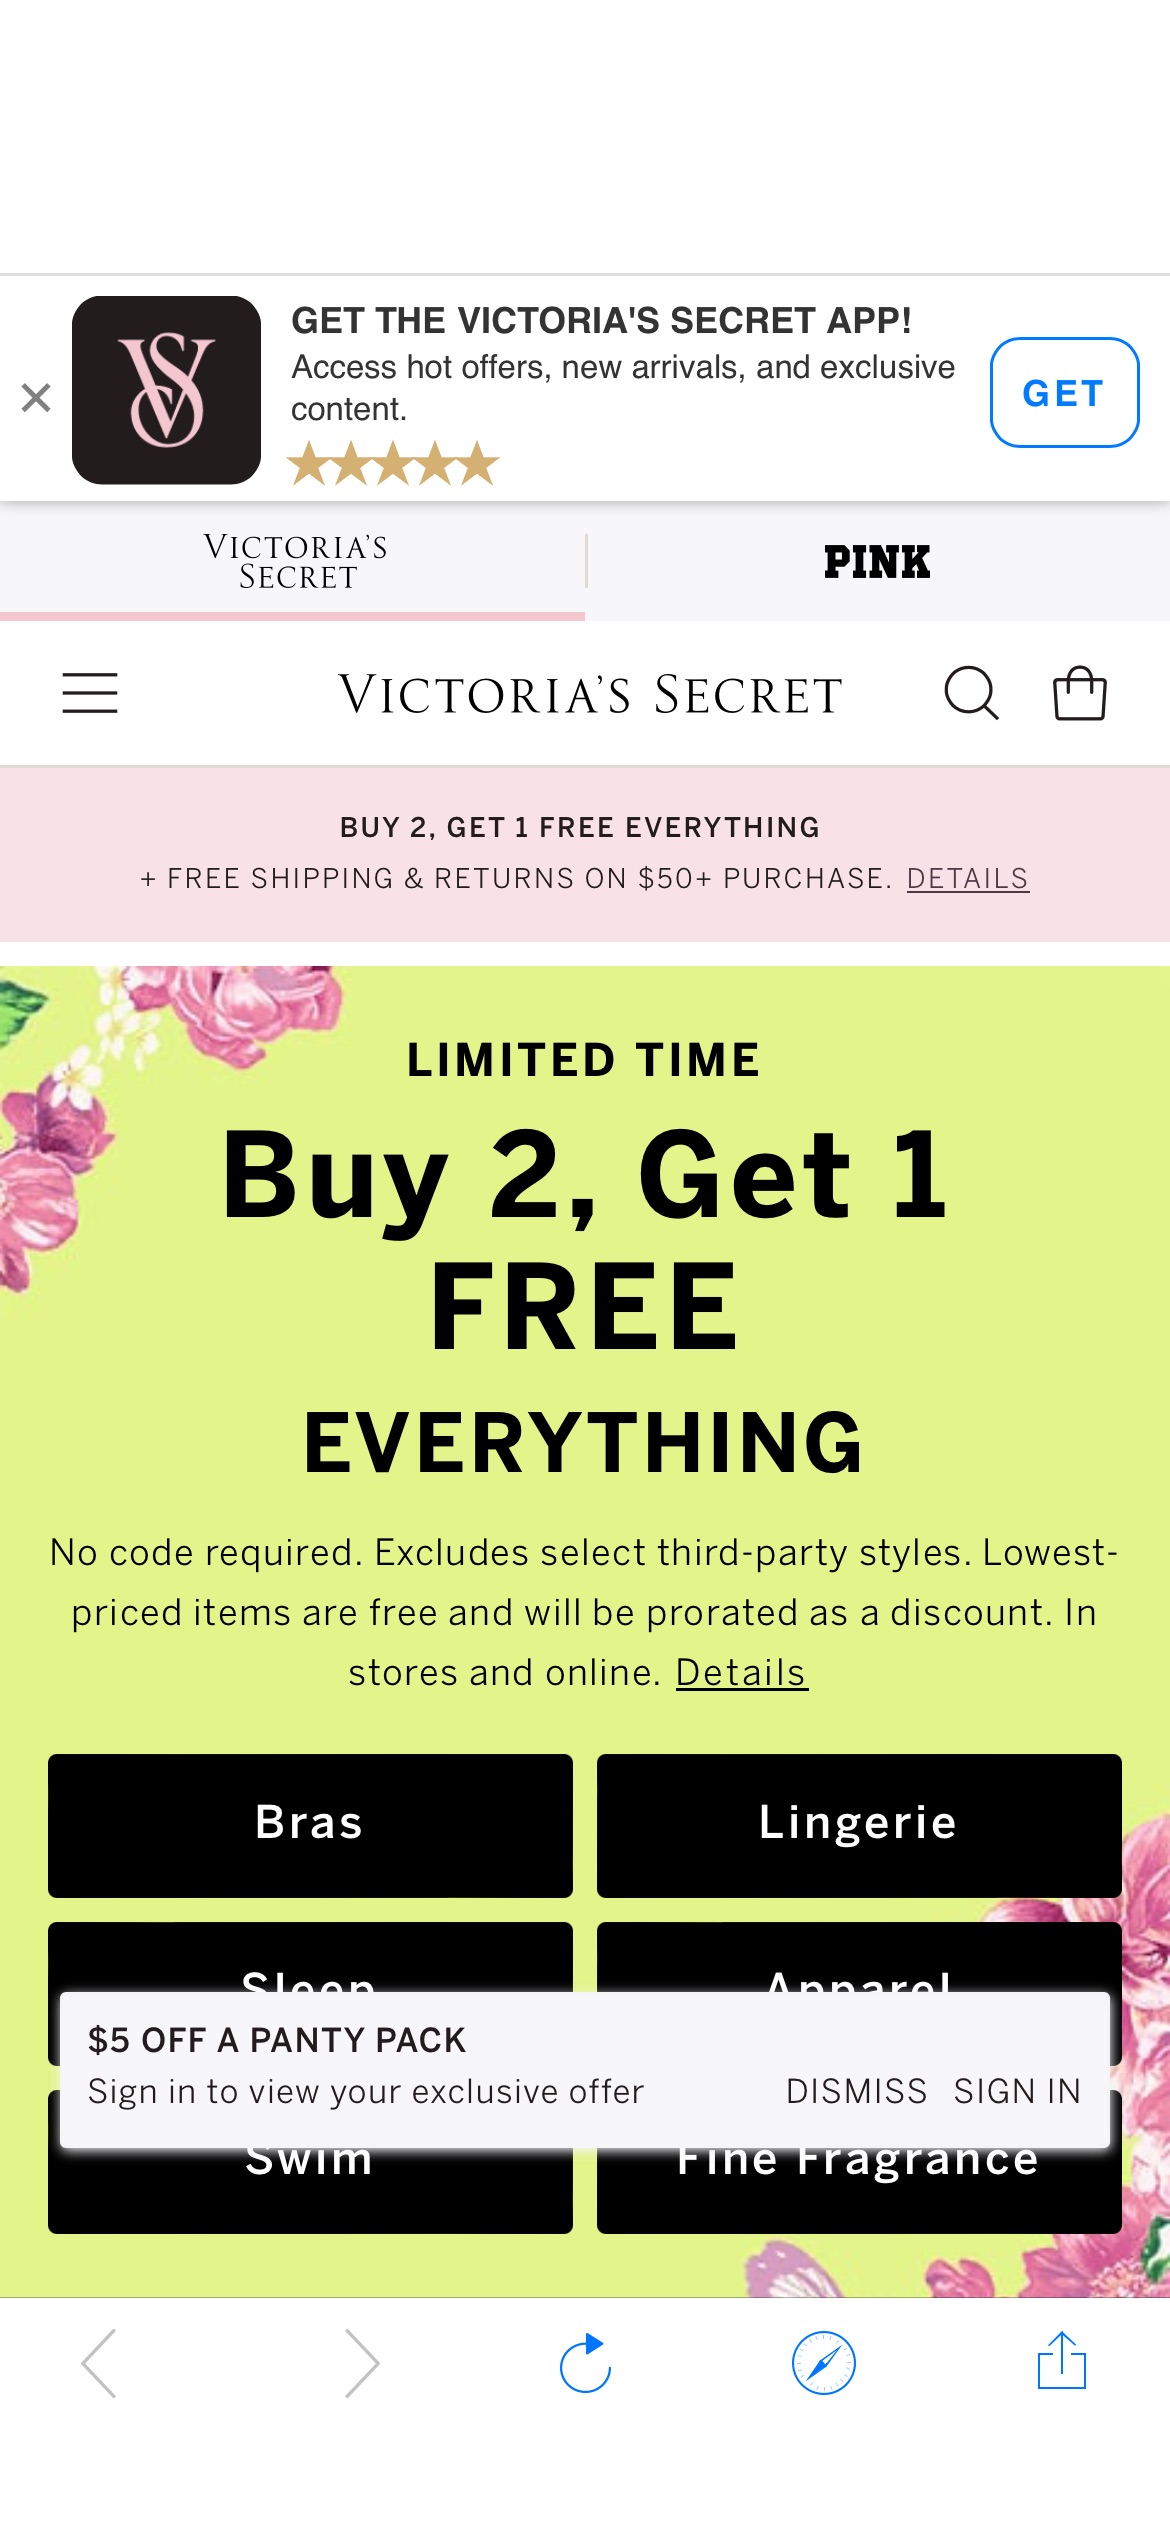 Victoria’s Secret: The World’s Most Famous Bras, Panties, Lingerie, Sportswear, Swimsuits, Beauty and Accessories